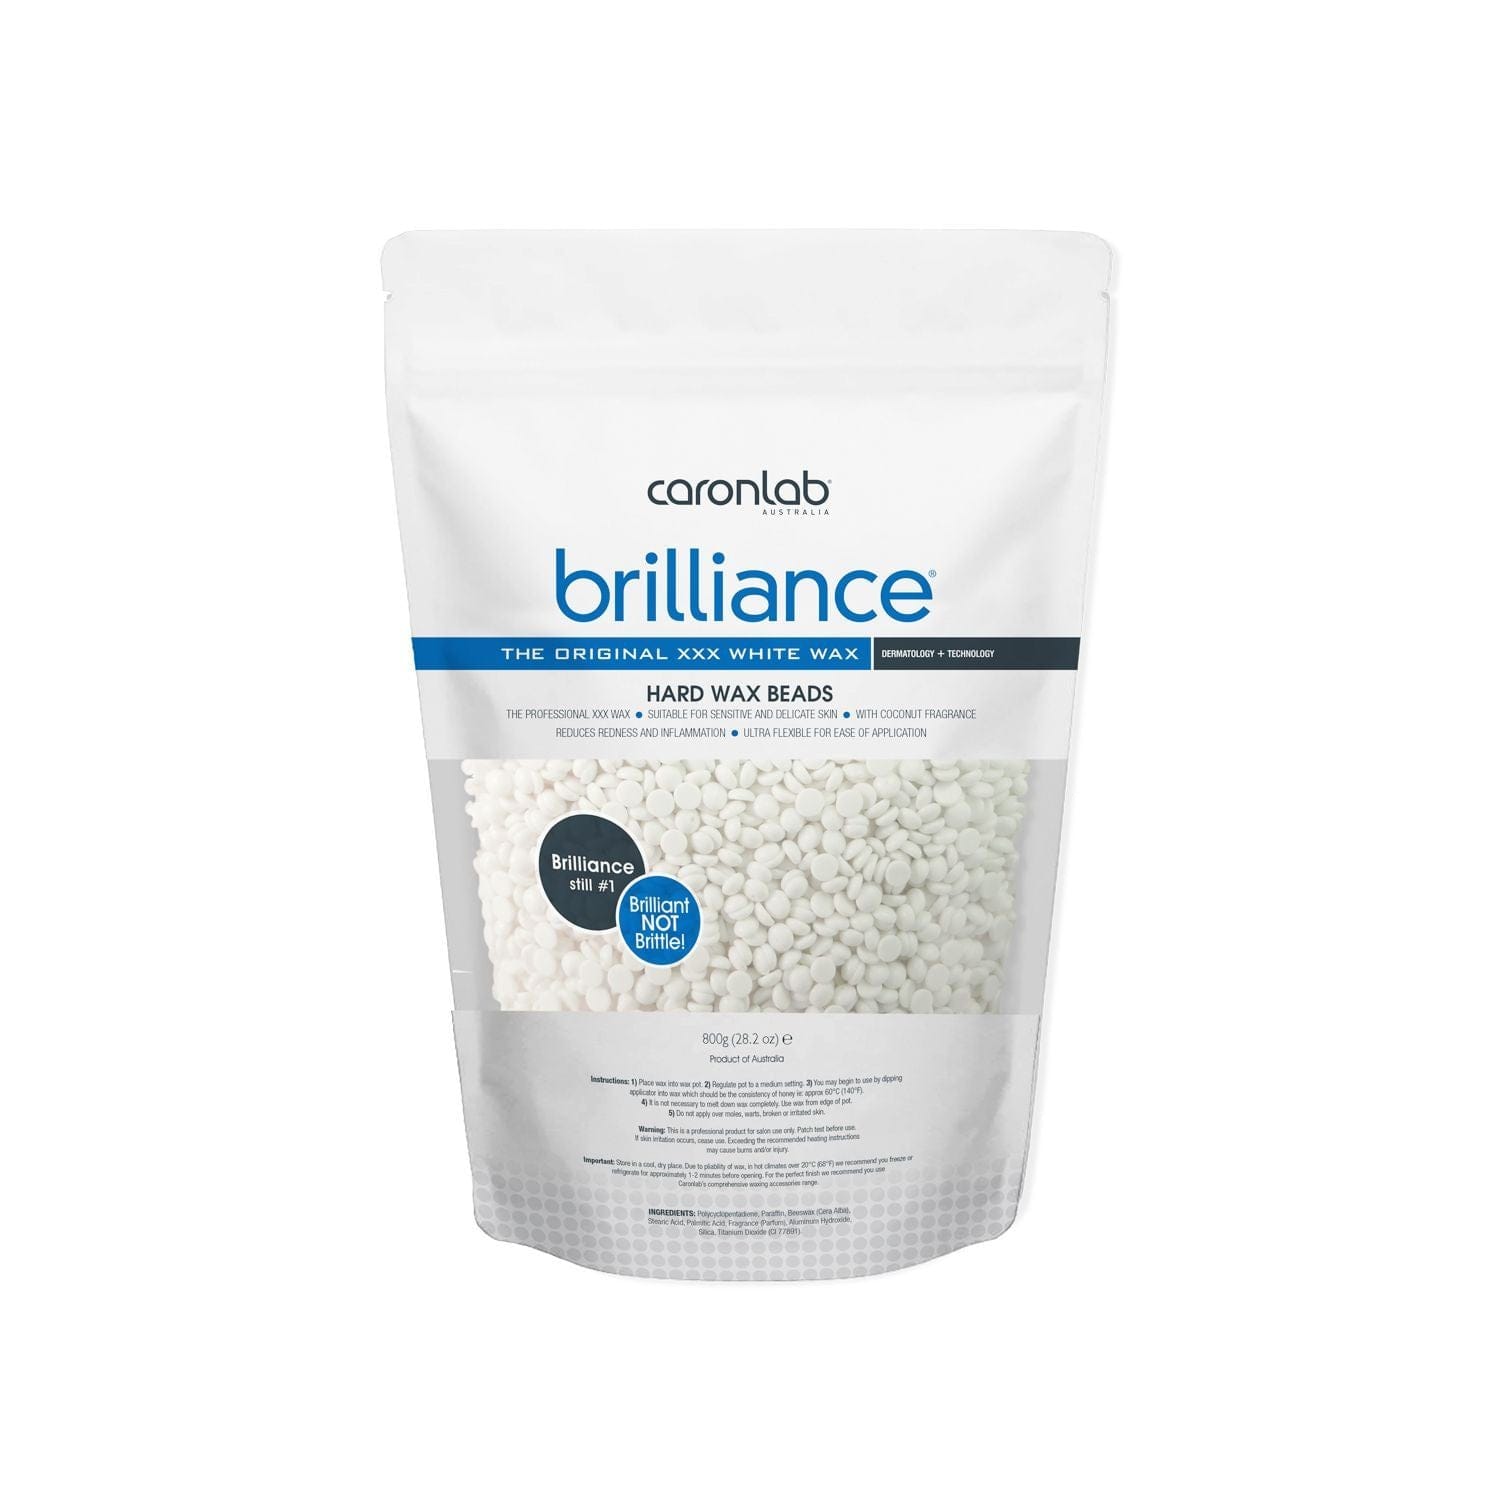 Brilliance Hard Wax Beads 800g Beauty - Caron Lab - Luxe Pacifique